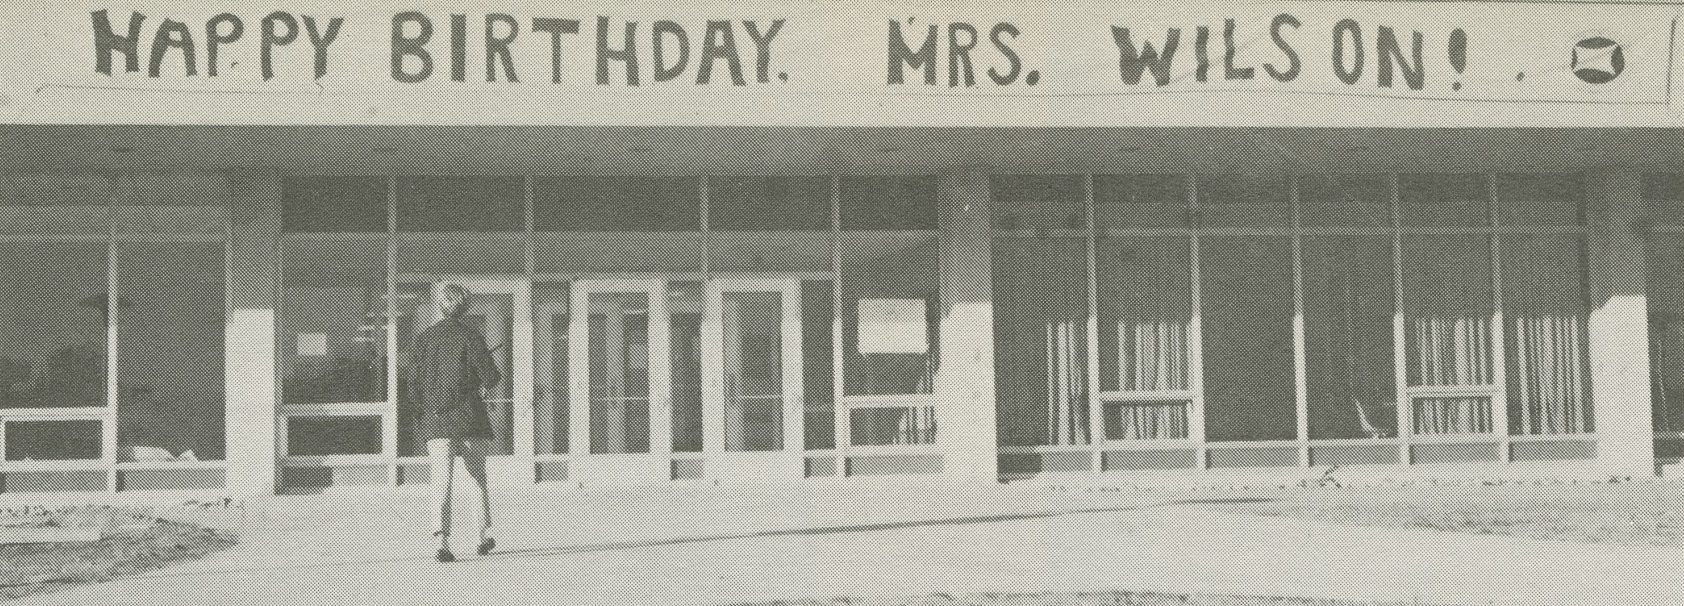 Giant Happy Birthday sign on the outside wall of the Oakland Center, 1966